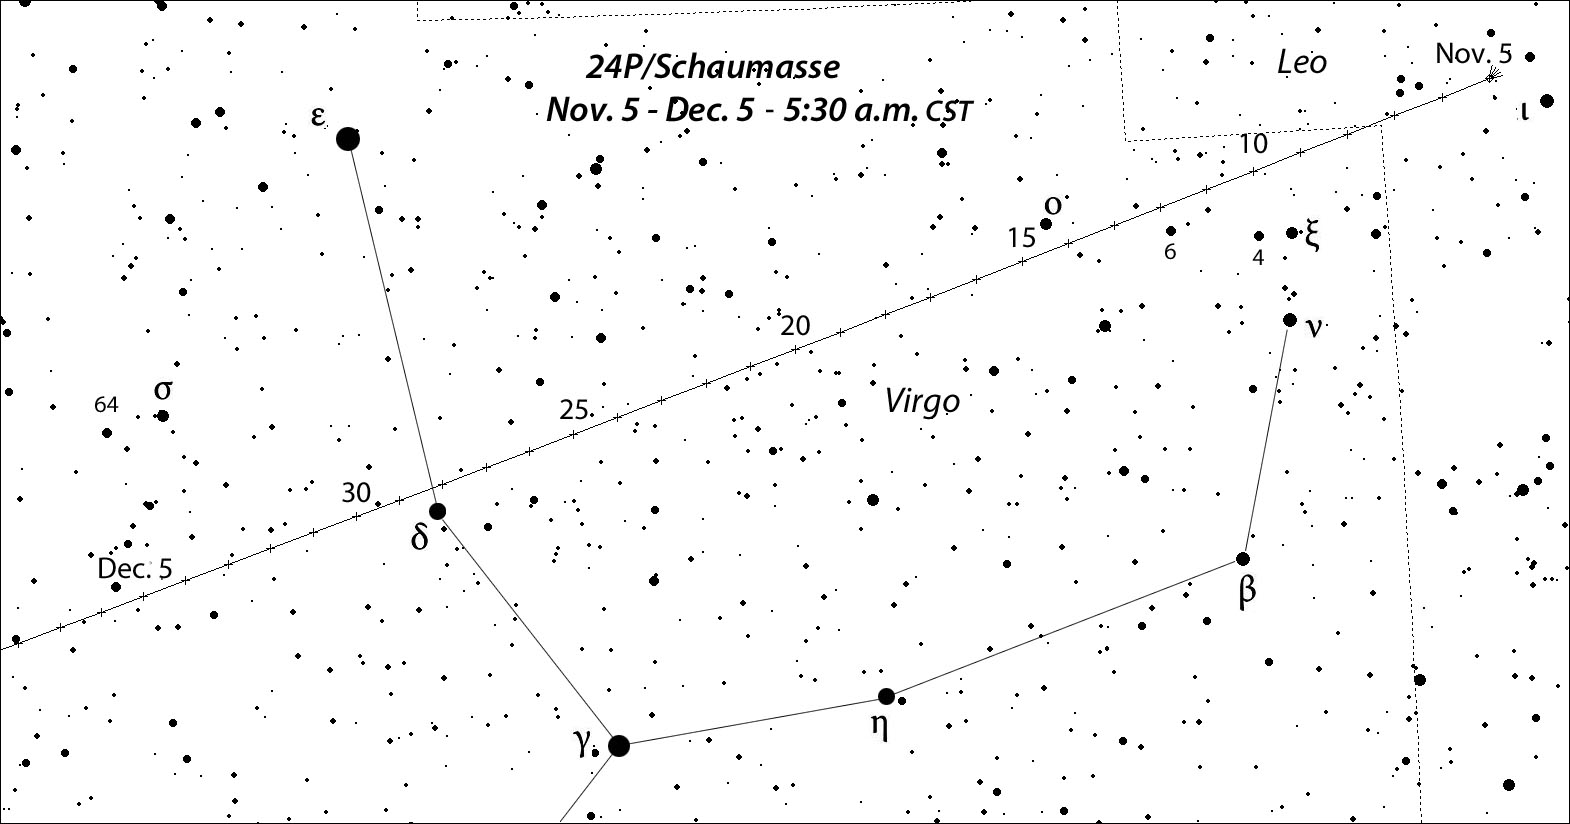 Another visible comets 2017 event for early birds: 24P/Schaumasse returns after 8.2 years, gliding from eastern Leo through Virgo in the wee hours of November and December.